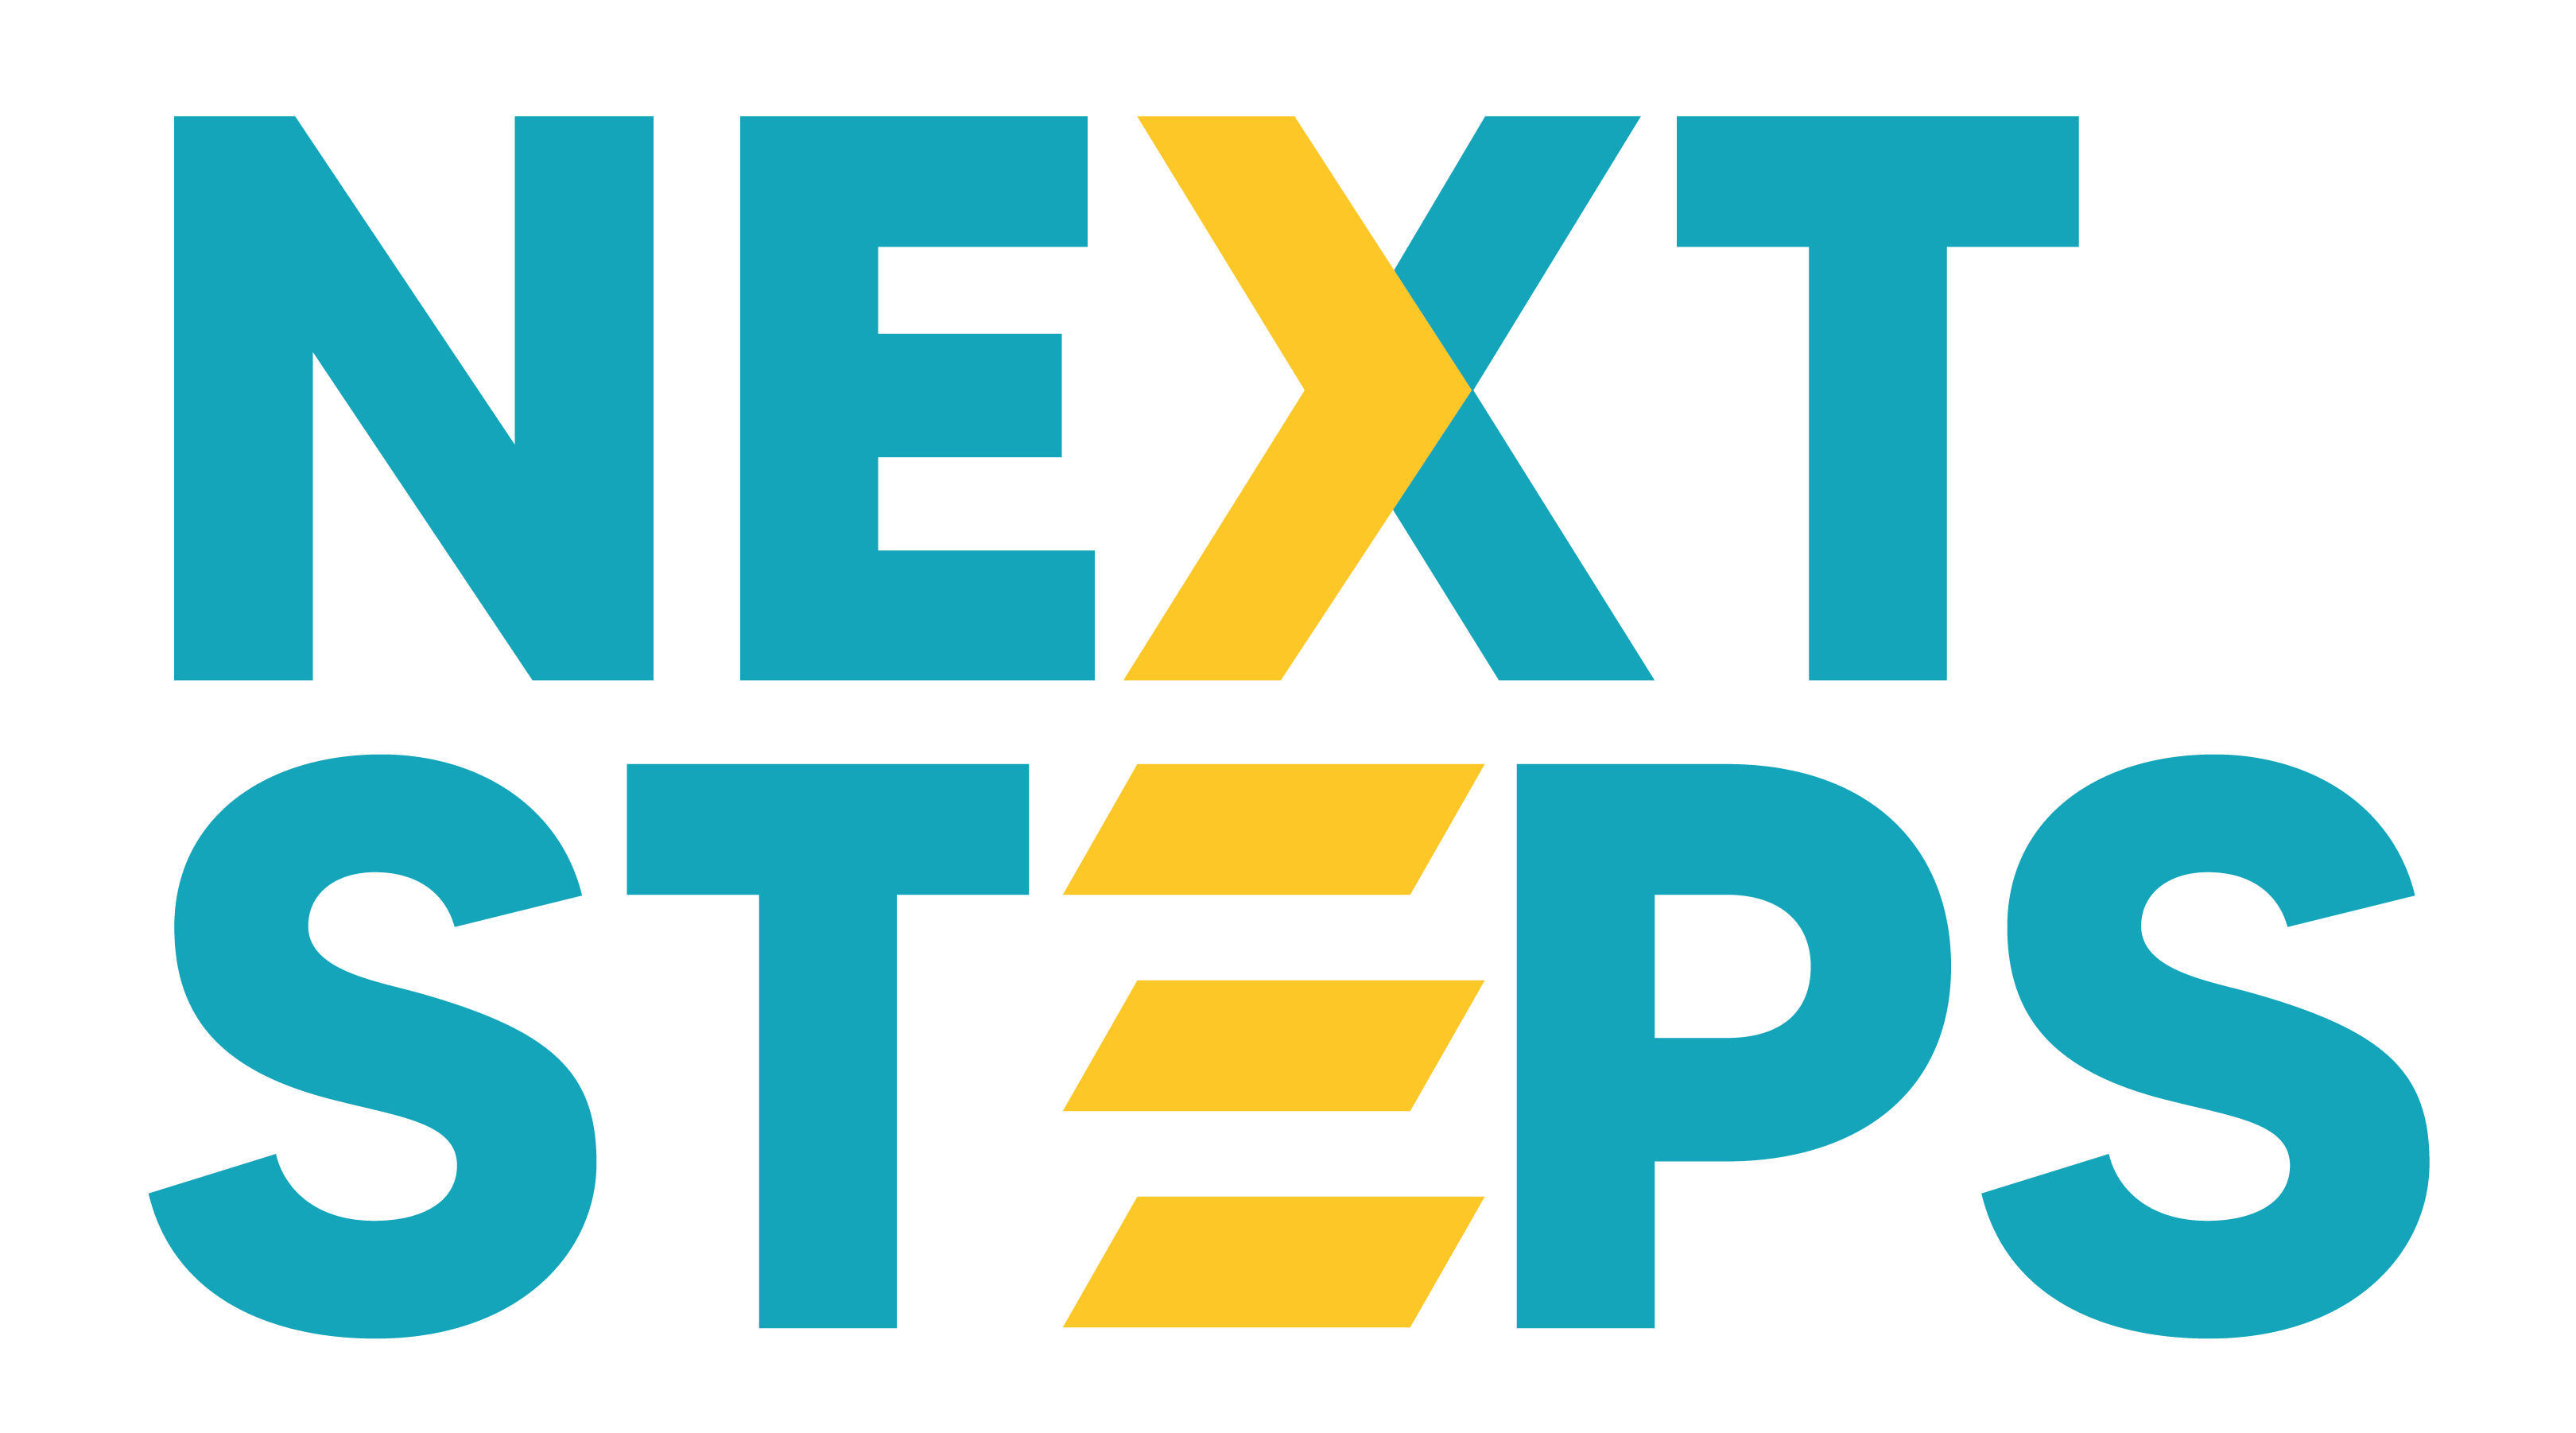  The image shows the logo of 'NEXT STEPS', which is a spiritual consulting company. The logo is in teal and yellow colors, with the words 'NEXT' and 'STEPS' written in large, bold letters. The image represents the search query 'Steps to implement insights from spiritual consultation' because it suggests that spiritual consultation can be a way to gain insights and direction for one's life.